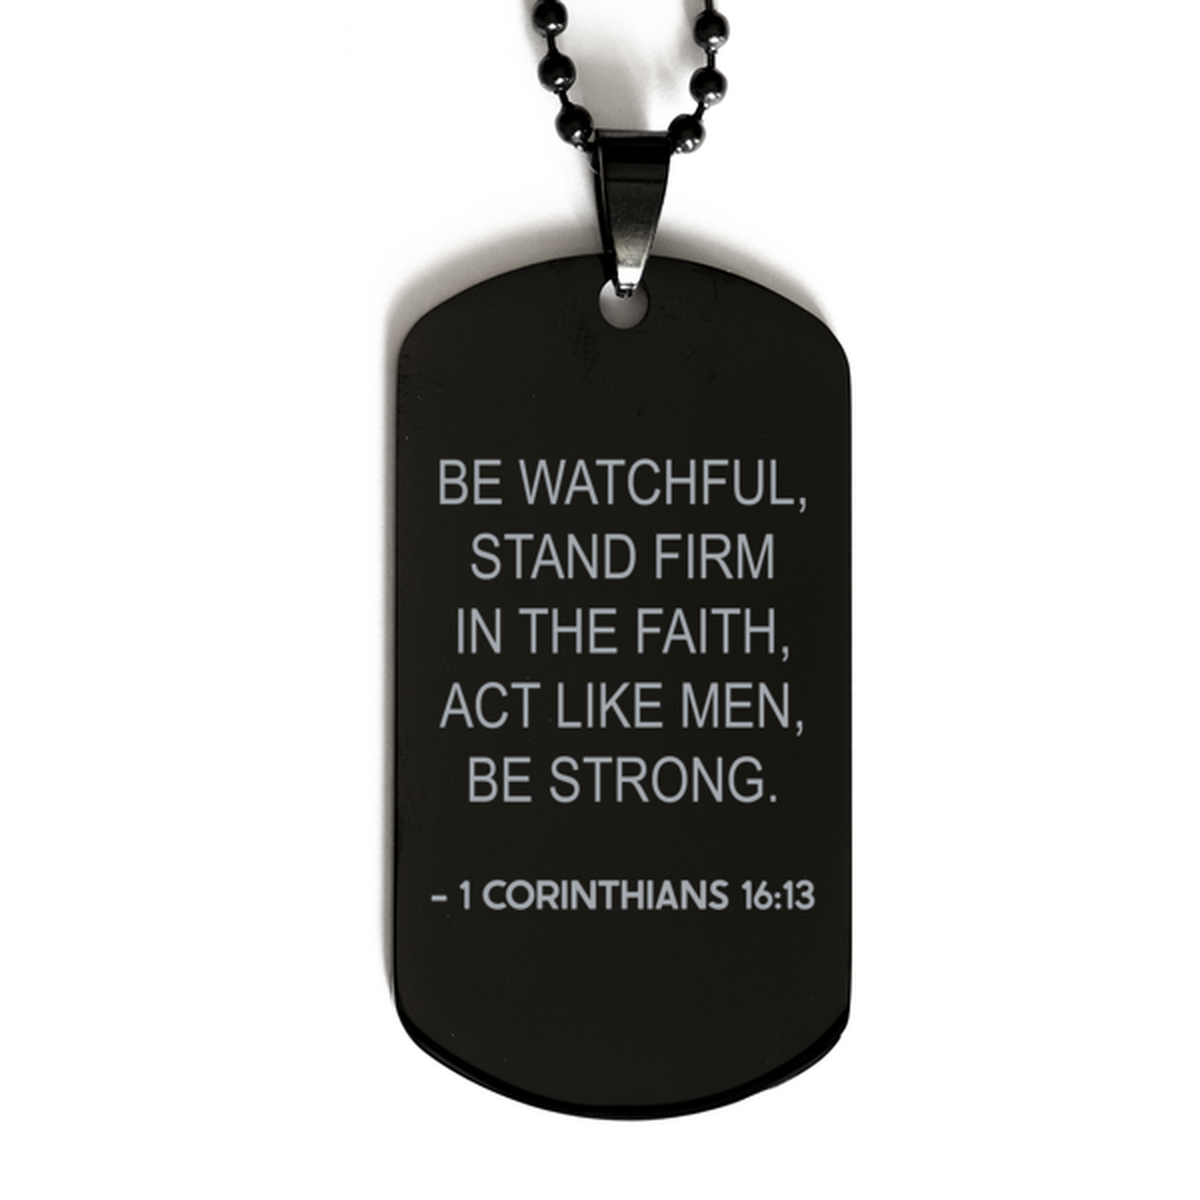 Bible Verse Black Dog Tag, 1 Corinthians 16:13 Be Watchful, Stand Firm In The Faith, Christian Inspirational Necklace Gifts For Men Women